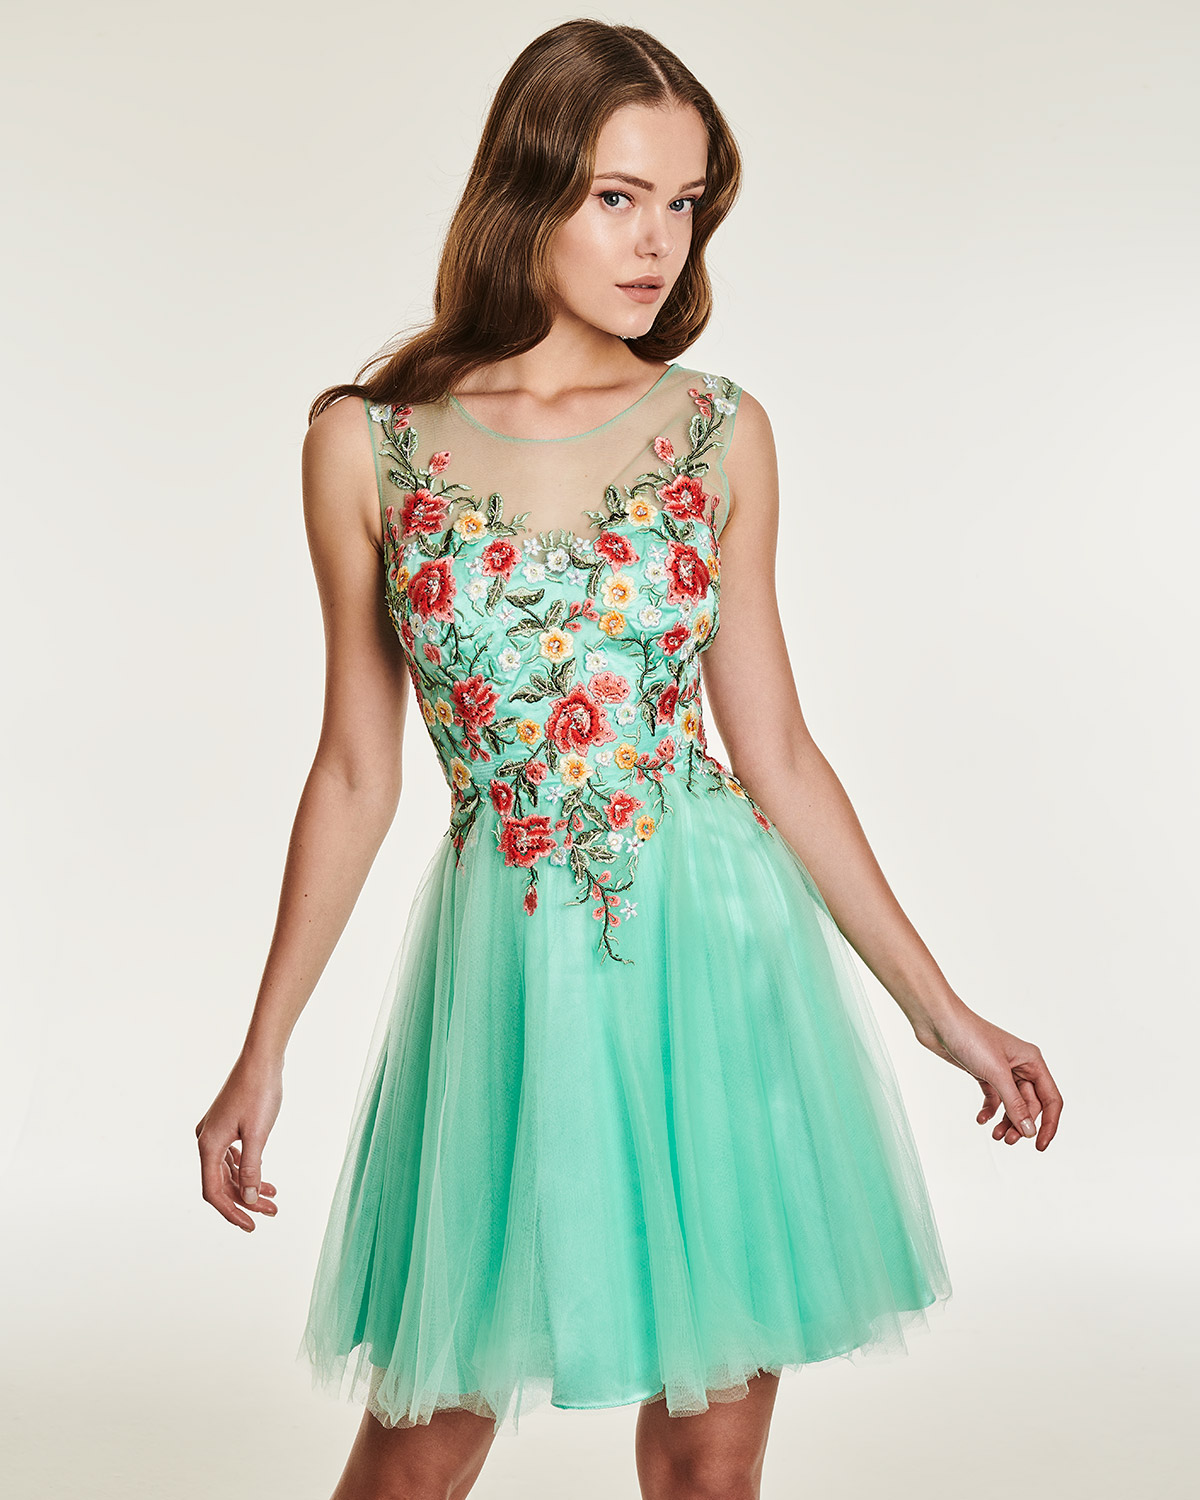 Short cocktail tulle dress with applique flowers